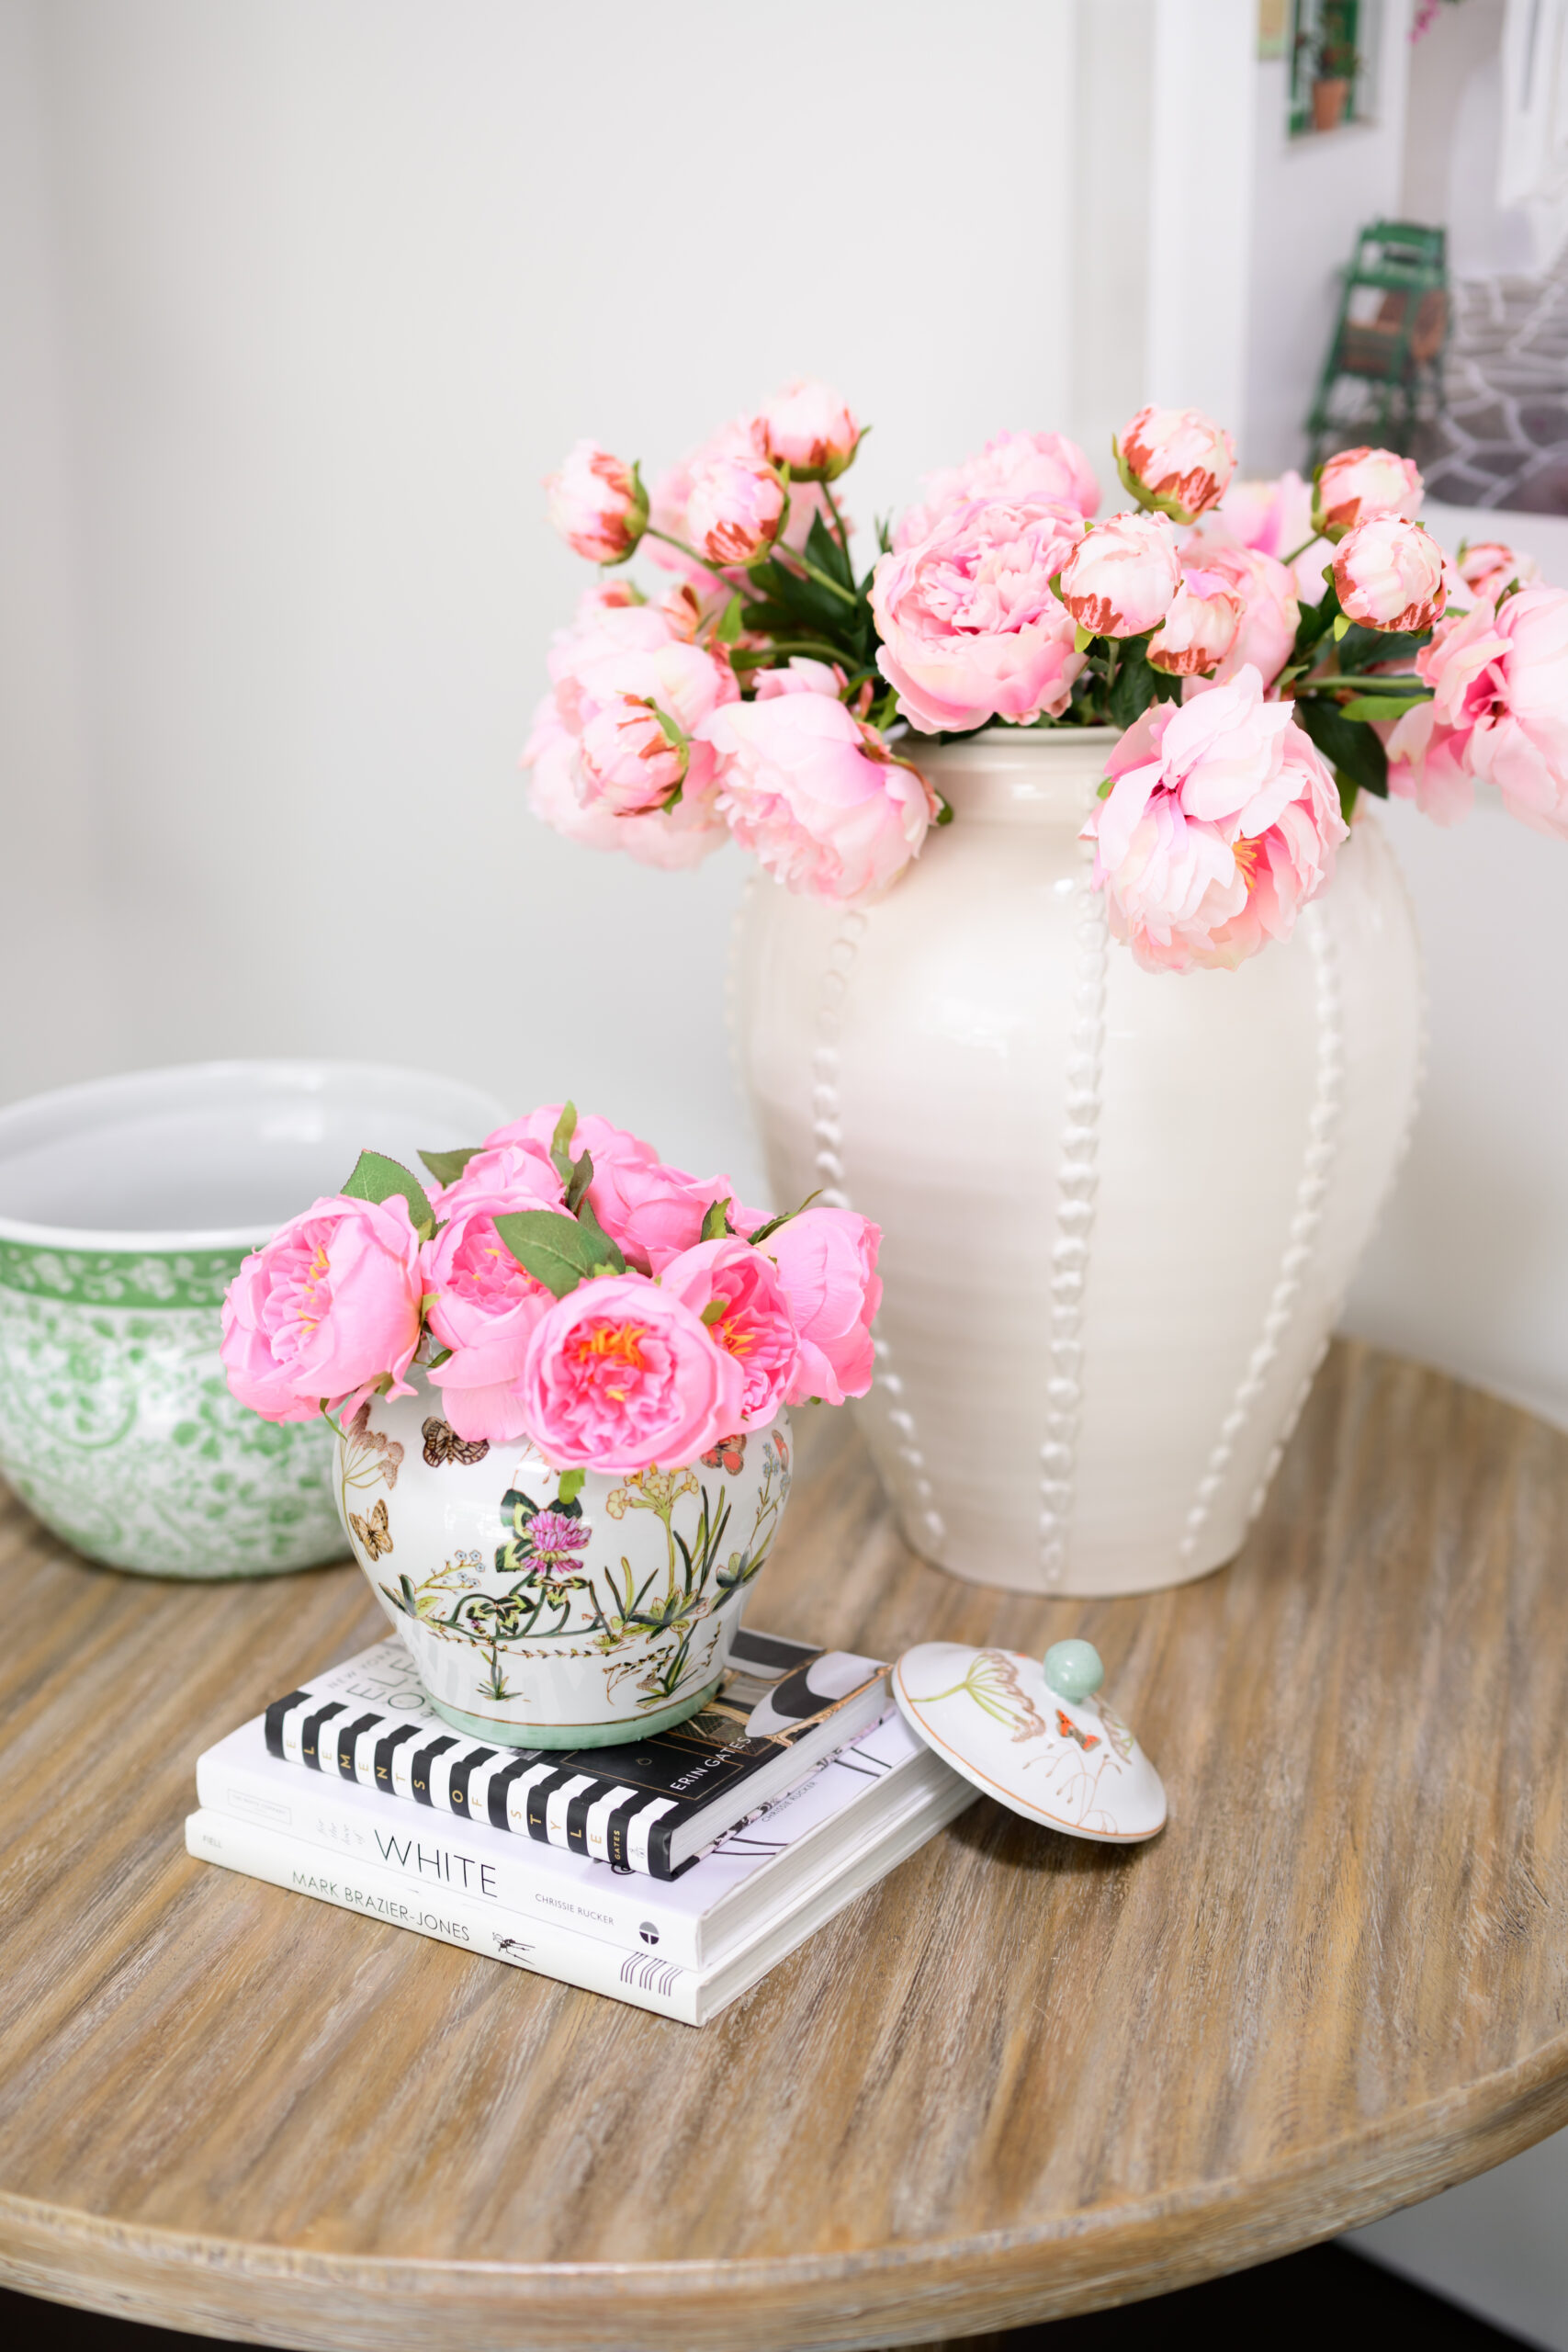 Photography Props that Speak to Your Brand 

#photography #props #audriedollins #admediagroup #admedia #contentsession #contentprops #amazonstorefront #flowers #homedecor #food #treats #coffeetablebook